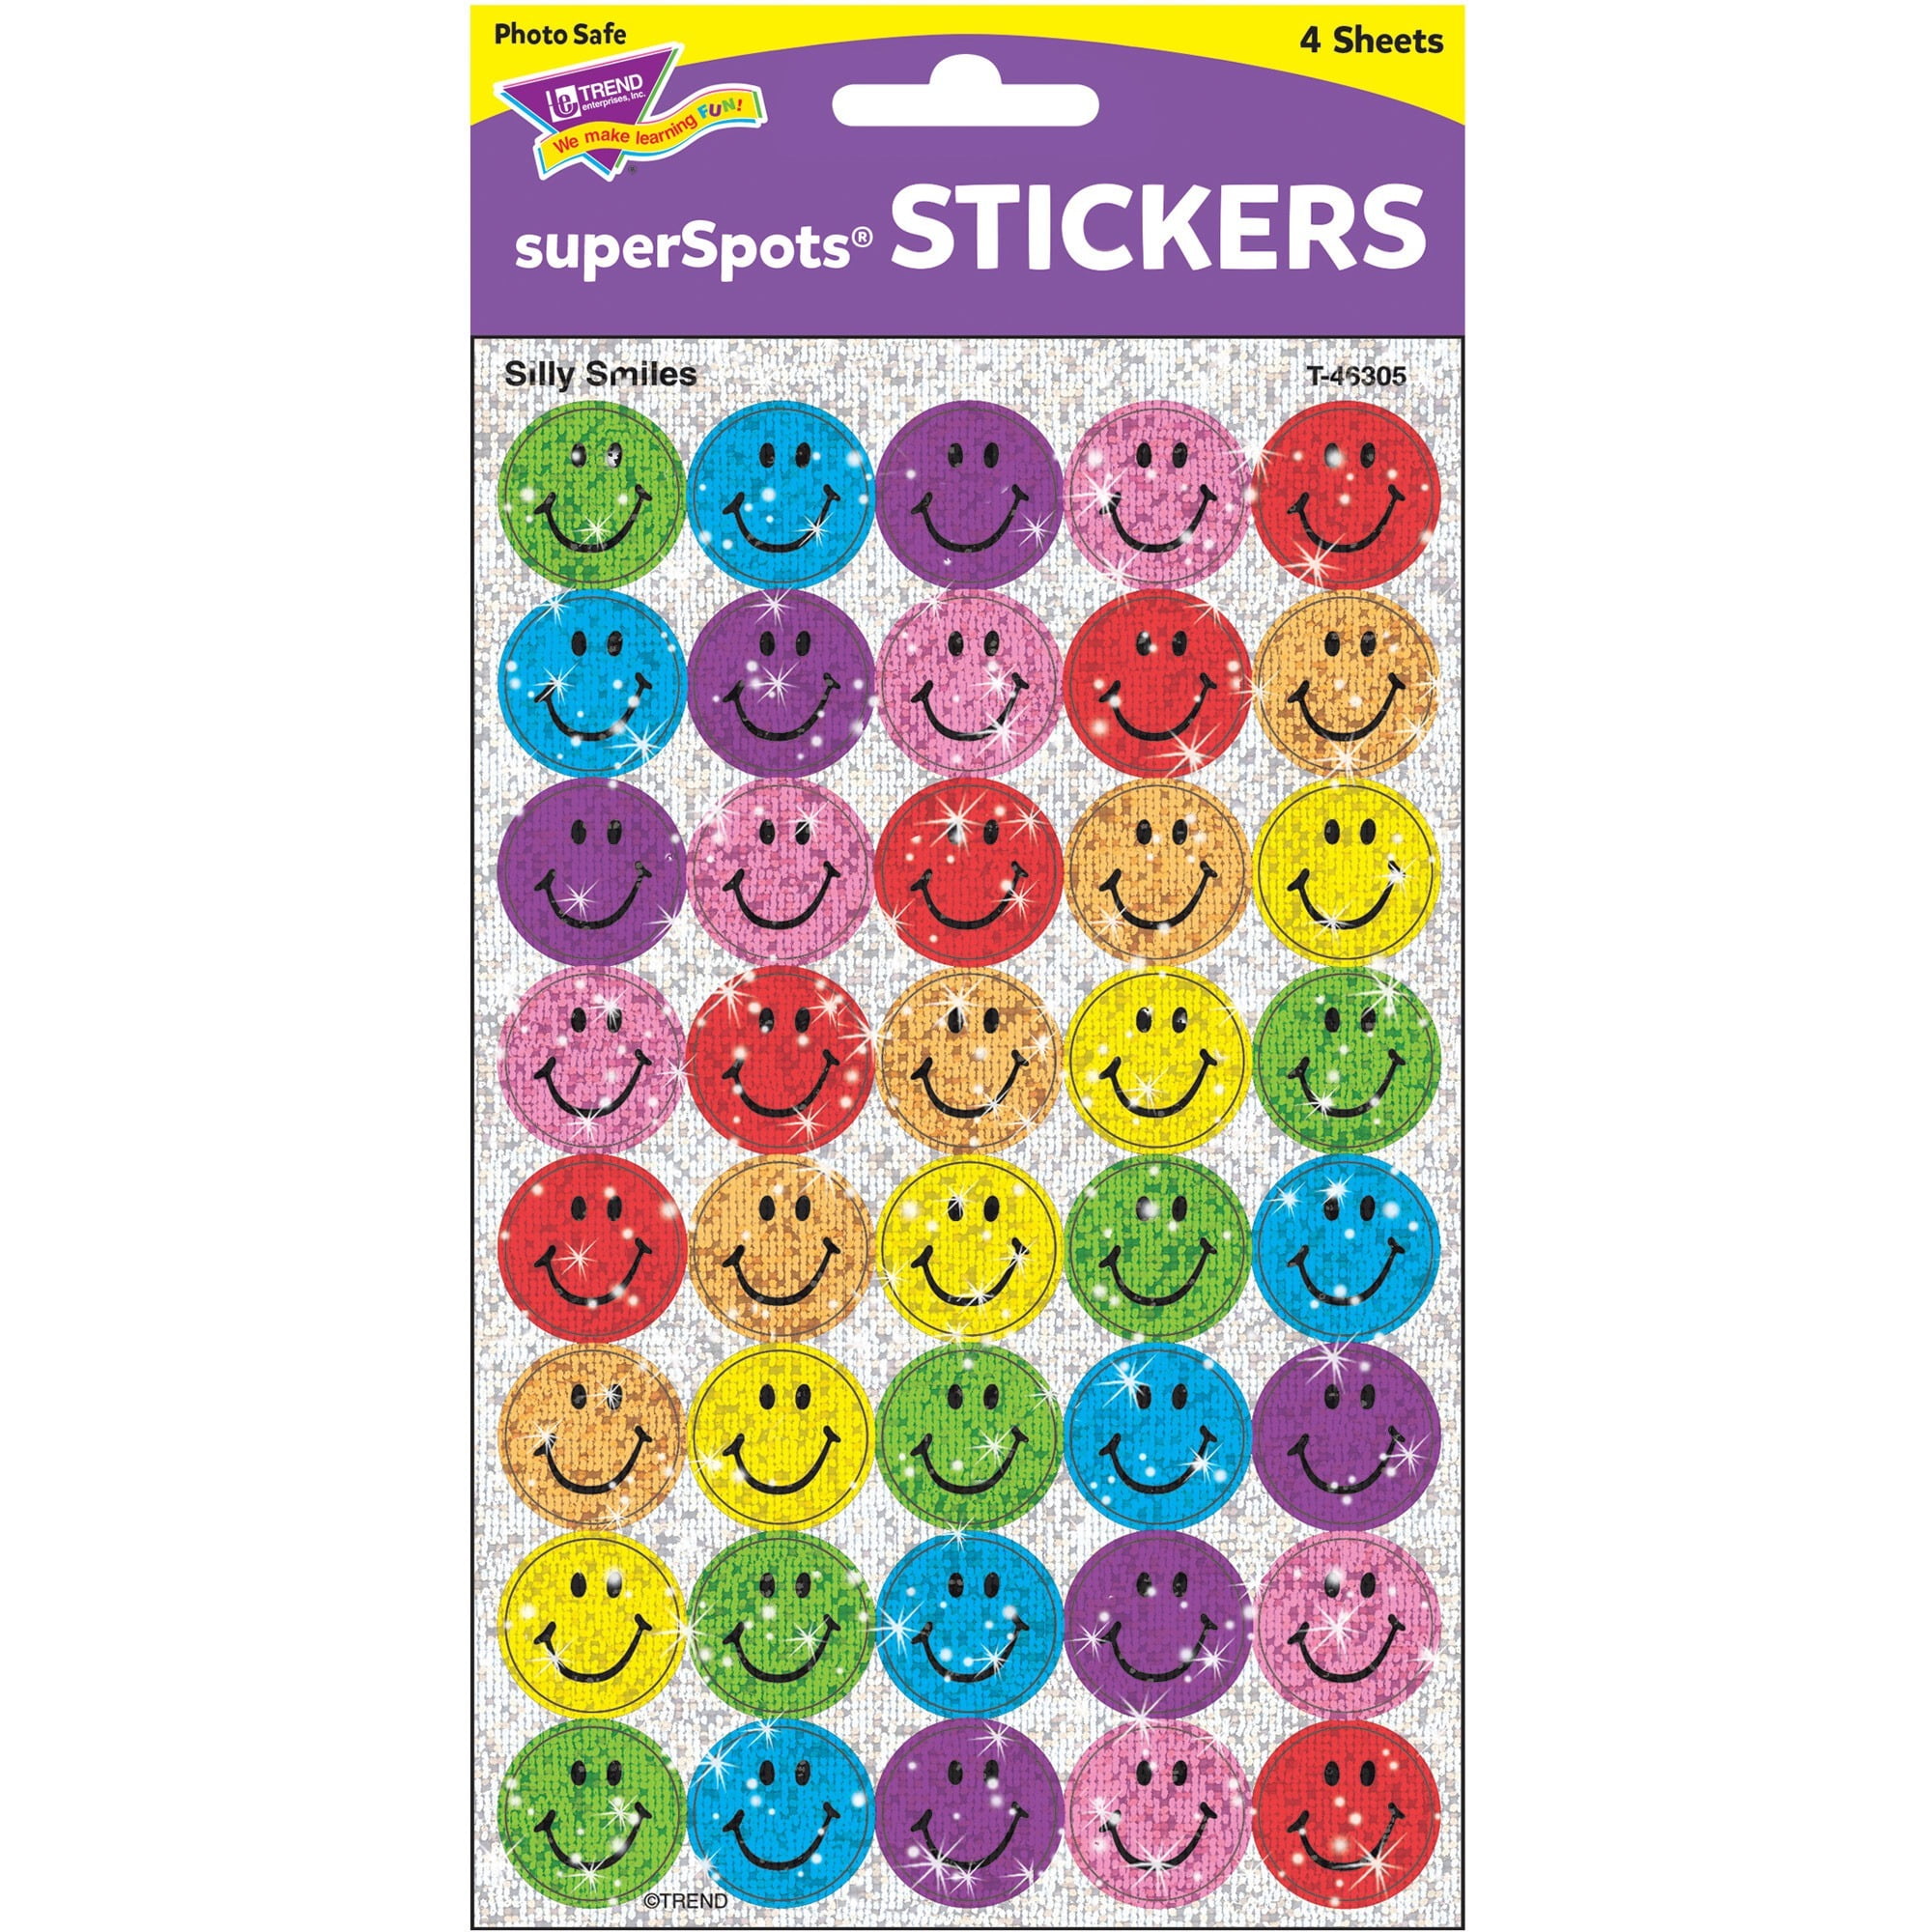 Trend Red Hearts superShapes Stickers, 800 per Pack, 6 Packs